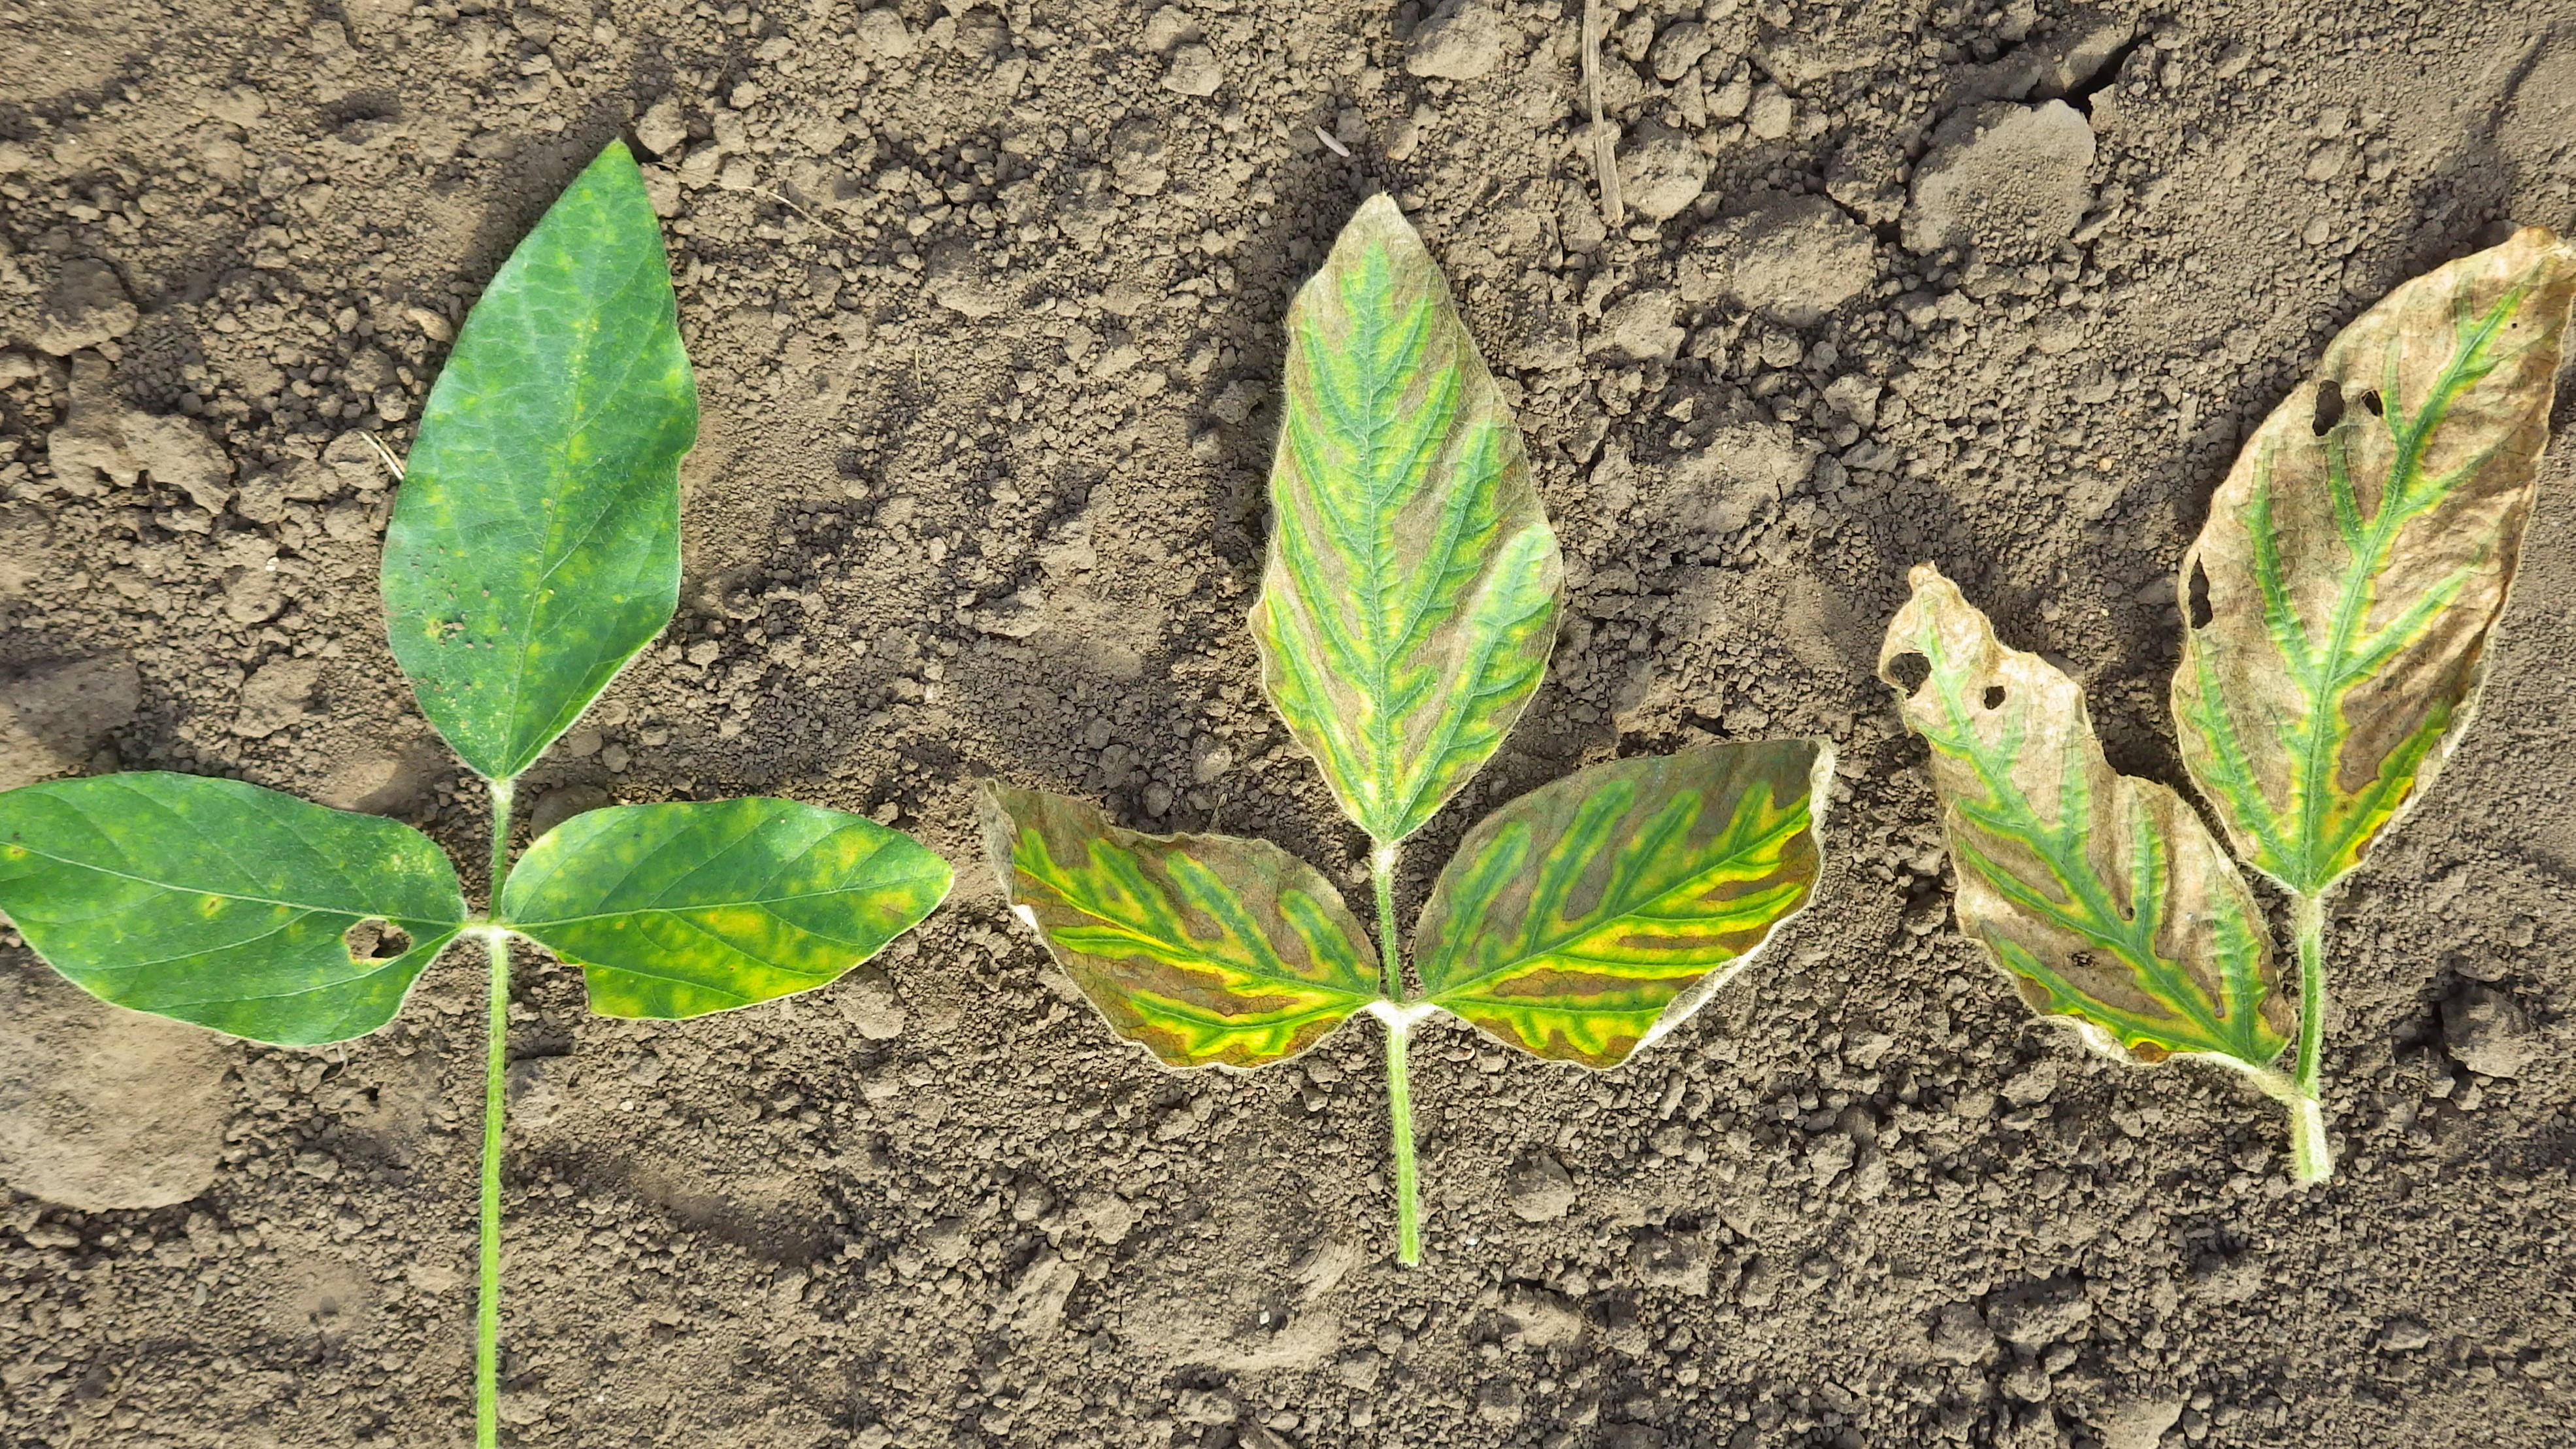 Three sets of soybean leaves in a horizontal lean. The leaf set on the left has small yellow spots primarily on one of the three leaves. The leaf set in the middle has yellow coloring along the veins of all three leaves and brown coloring everywhere else on the leaves. The leaf set on the right has two leaves both are mostly brown and curled at the edges.